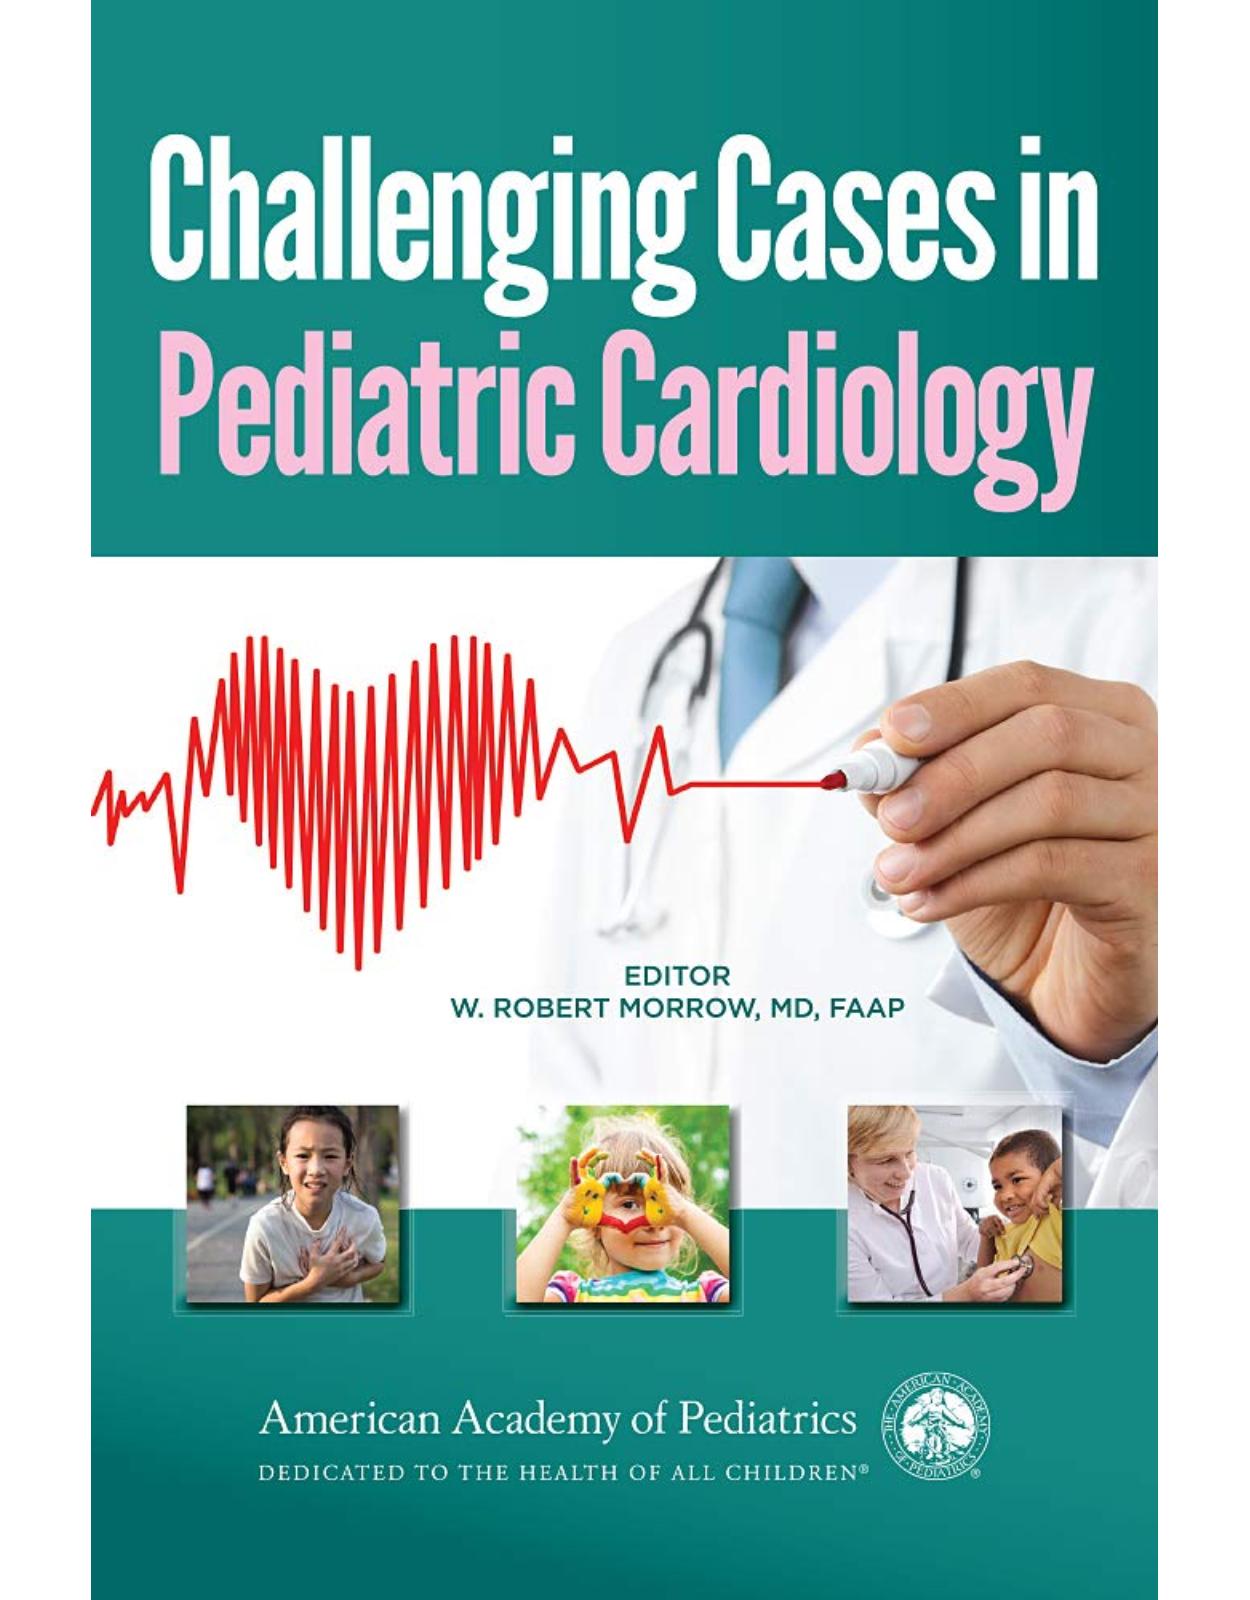 Challenging Cases in Pediatric Cardiology